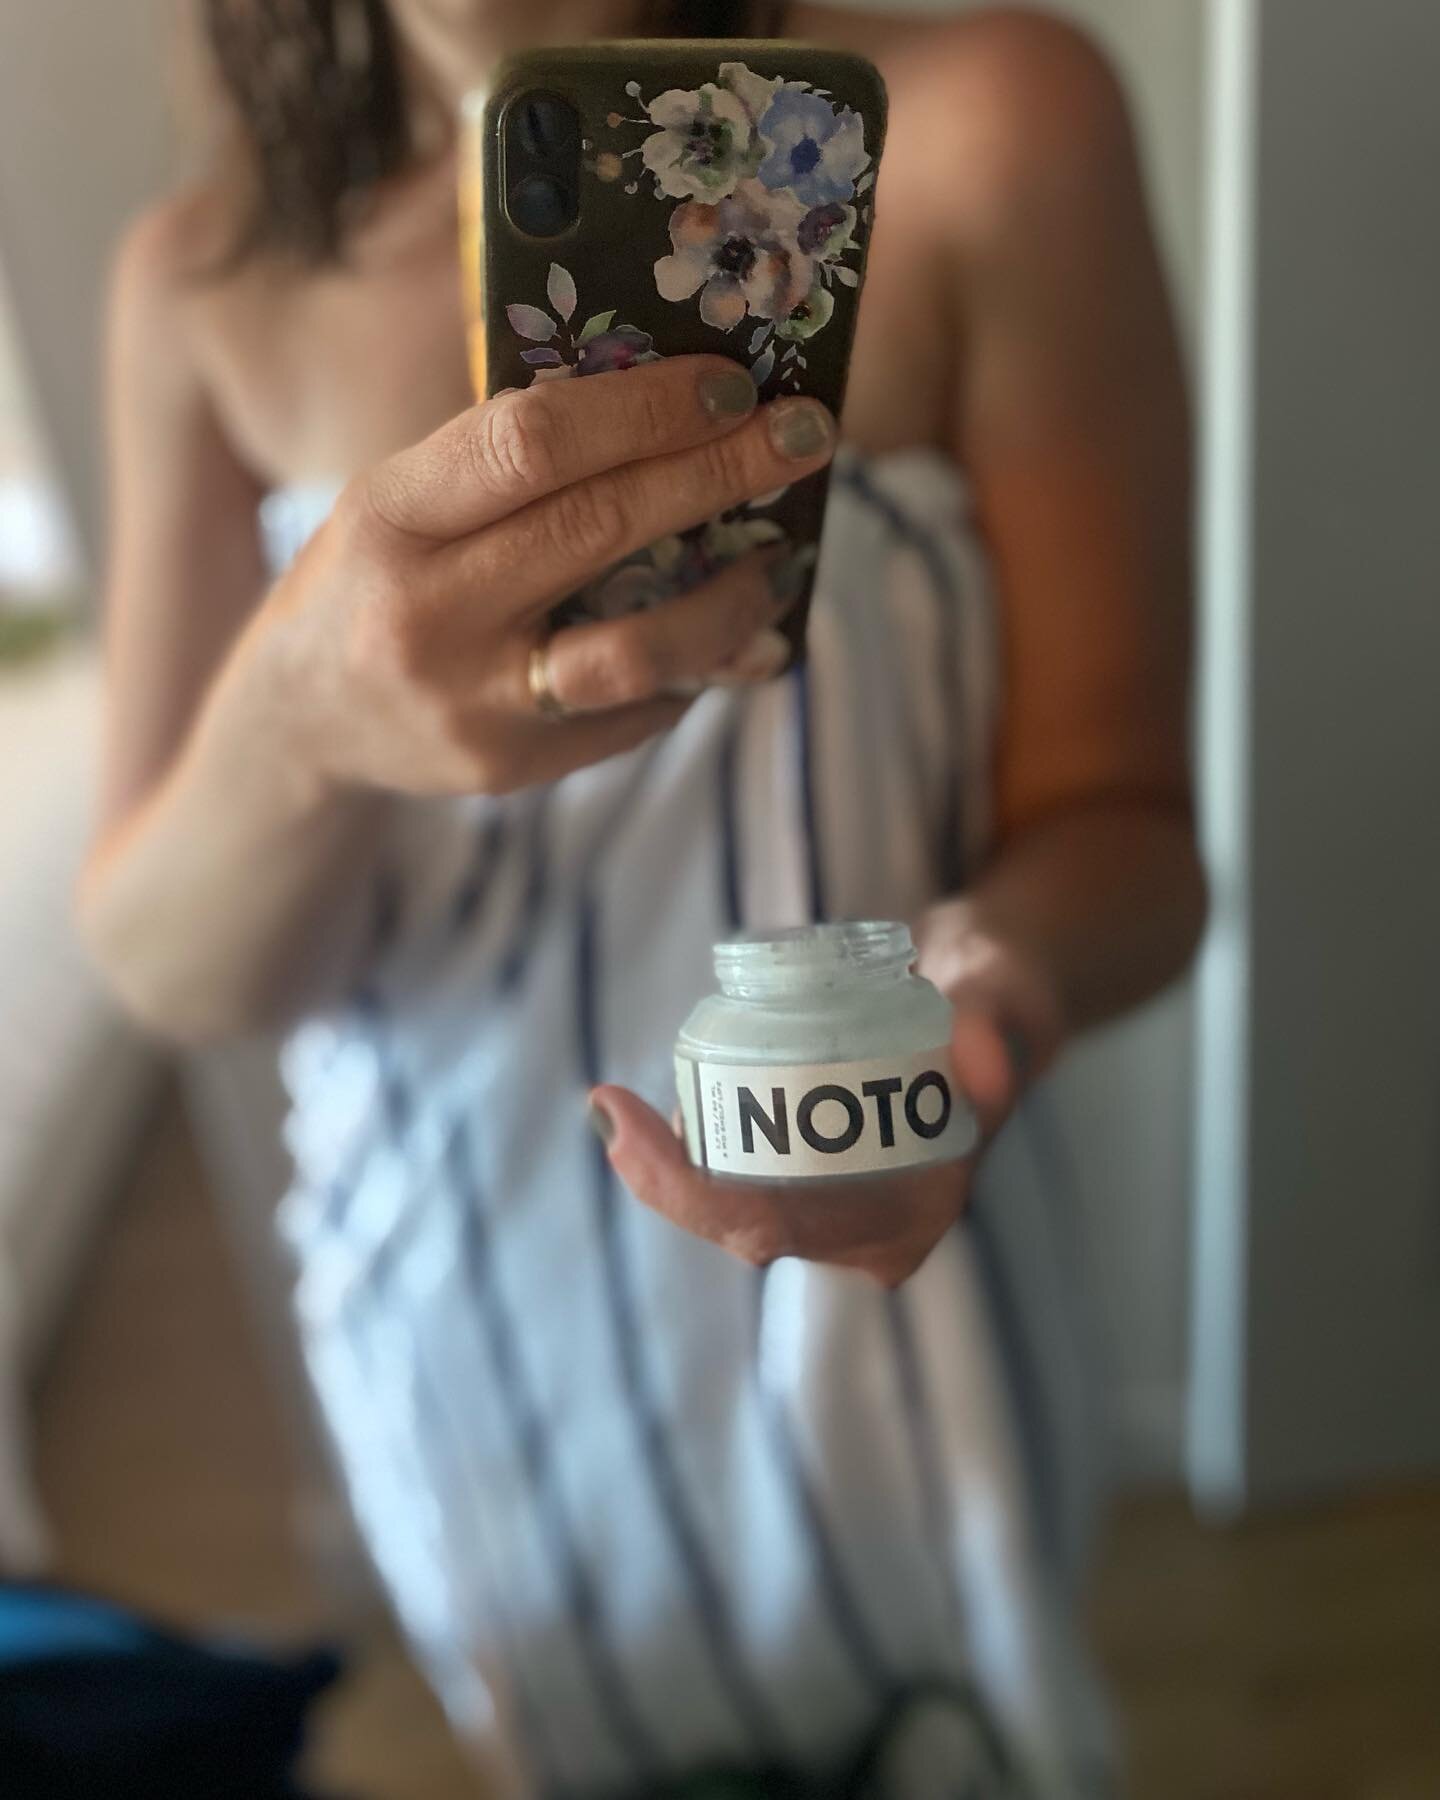 One of my favorite daily self care routines is using @noto_botanics Moisture Riser cream. I love breathing in the fresh scent and it feels oh-so luxurious. It also contains hyaluronic acid that leaves your skin glowing, hydrated and revitalized. And 